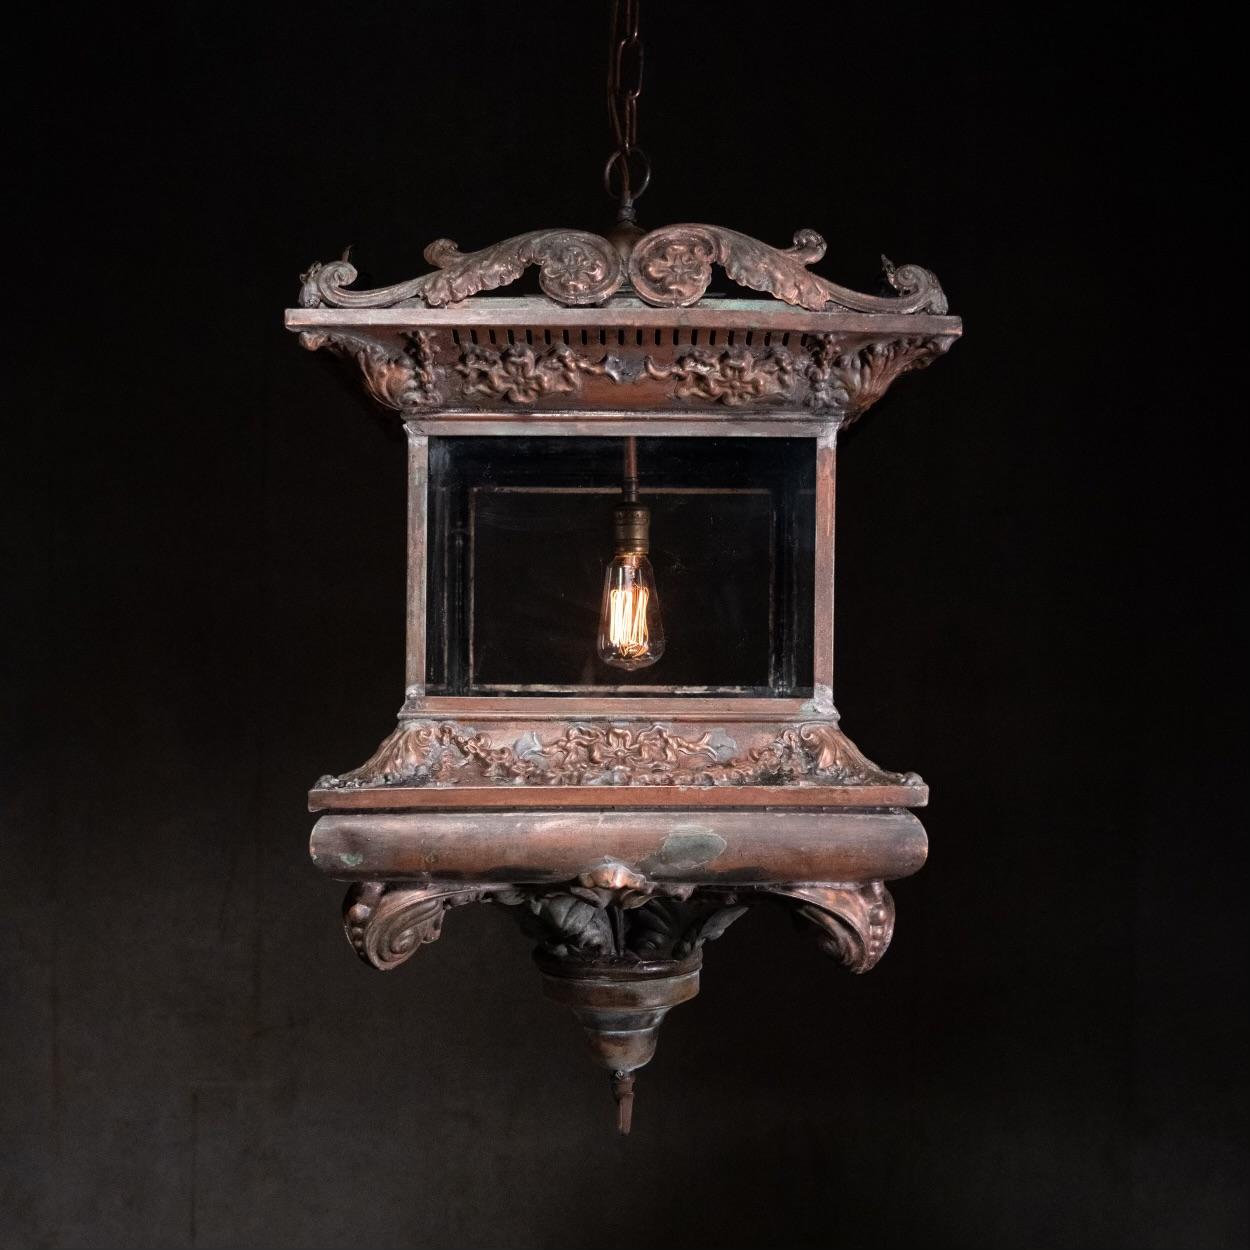 A pair of outstanding large lantern style pendants in embossed copper showing nice patina , detailed embossing , and a large impressive form.. these lights were found in the 1960's at a demolition  in NYC.. they are BTB French/Italian made and